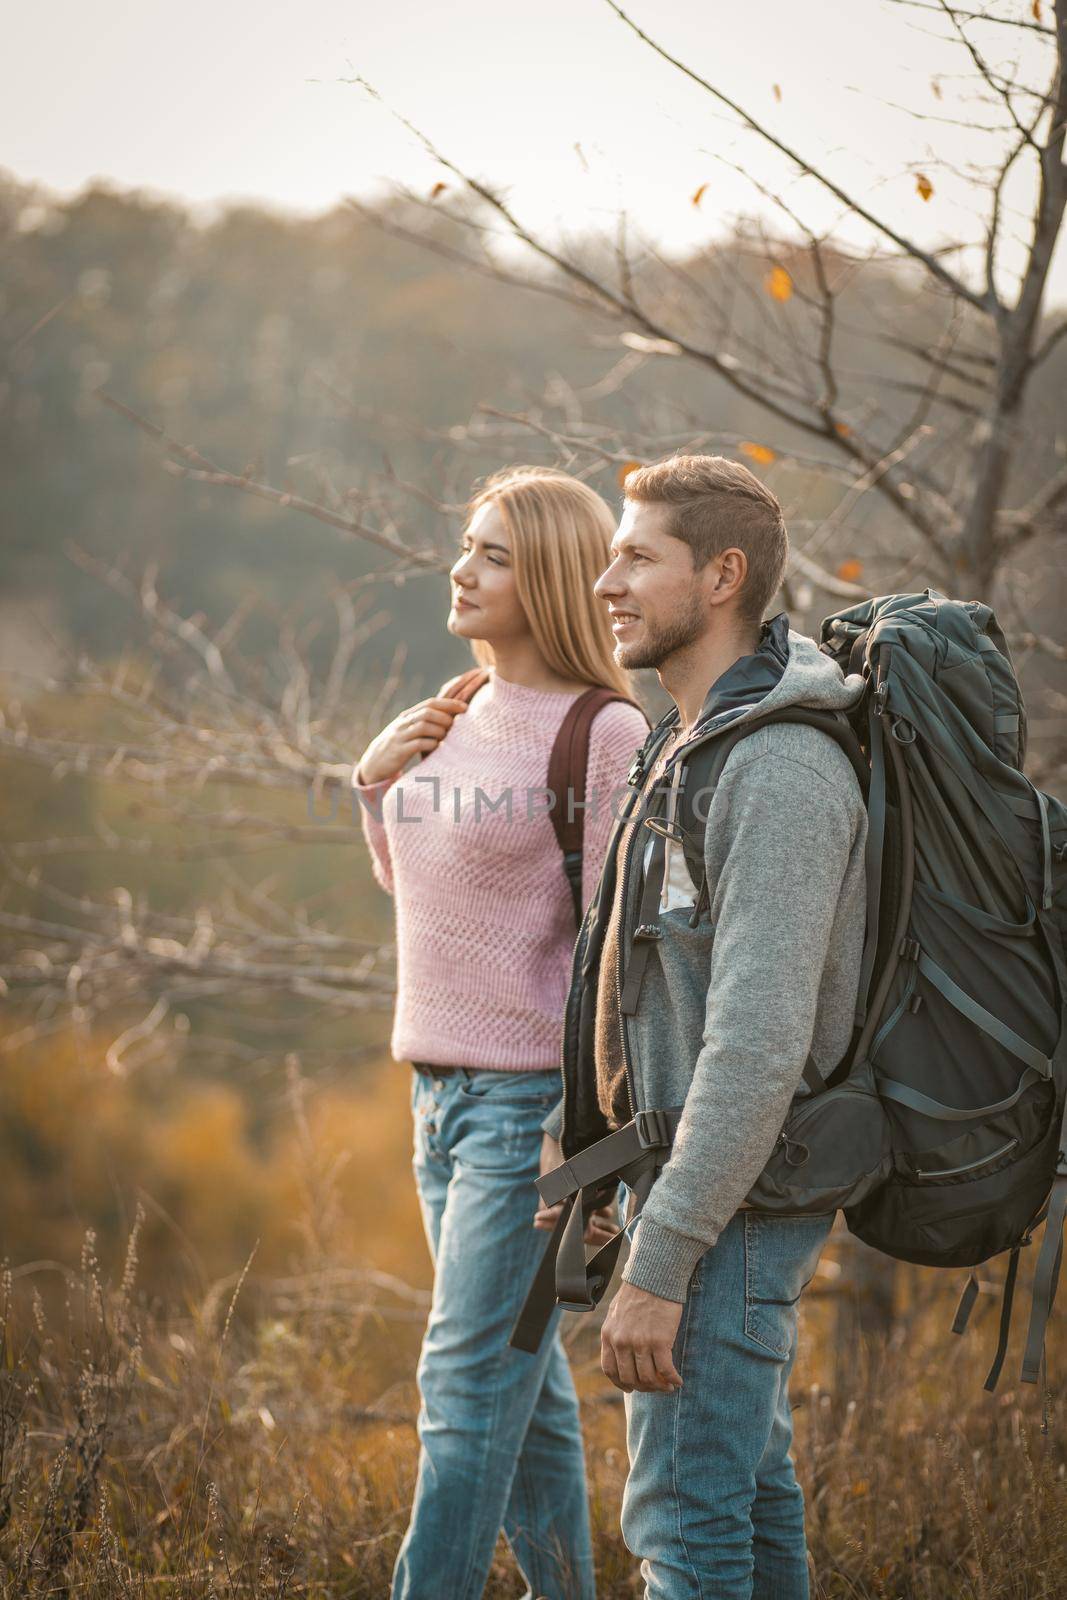 Couple of tourists admiring the natural scenery standing on a mountain side. Side view of a man and woman with backpacks are hiking in nature.